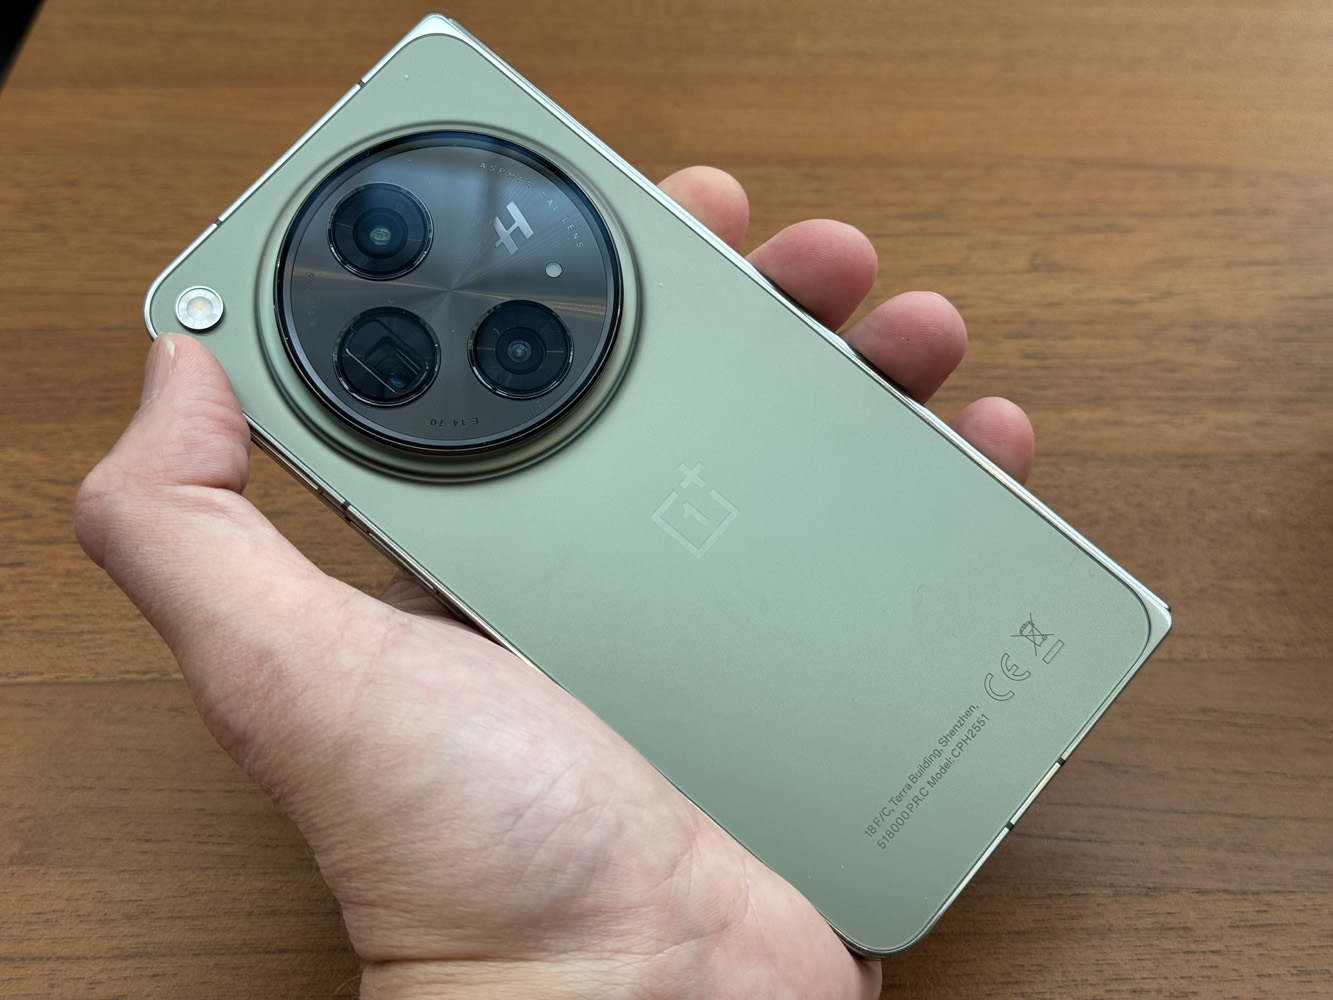 Huawei Mate 30 Pro, hands on: Superb hardware, but Google services are  sorely missed